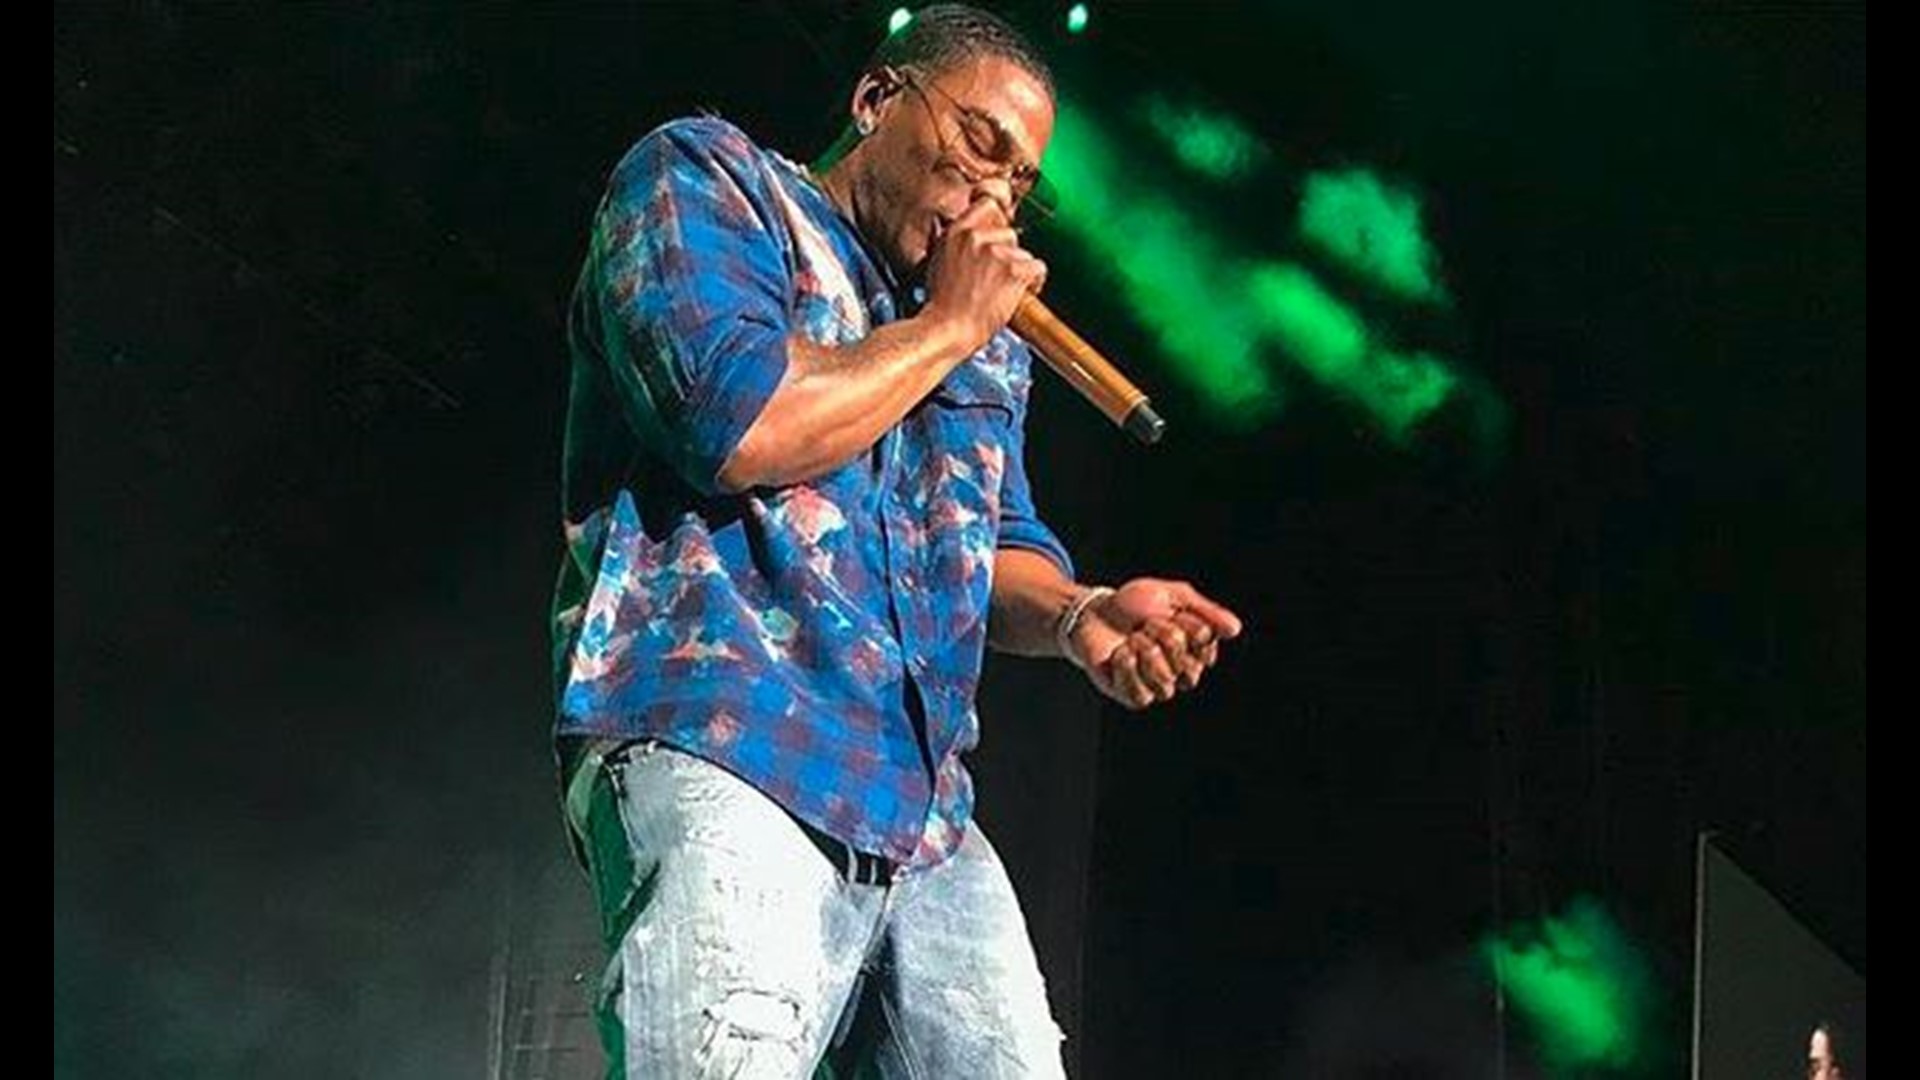 The Grammy award-winning rapper will be performing at The Backyard Bar Stage and Grill on May 7.